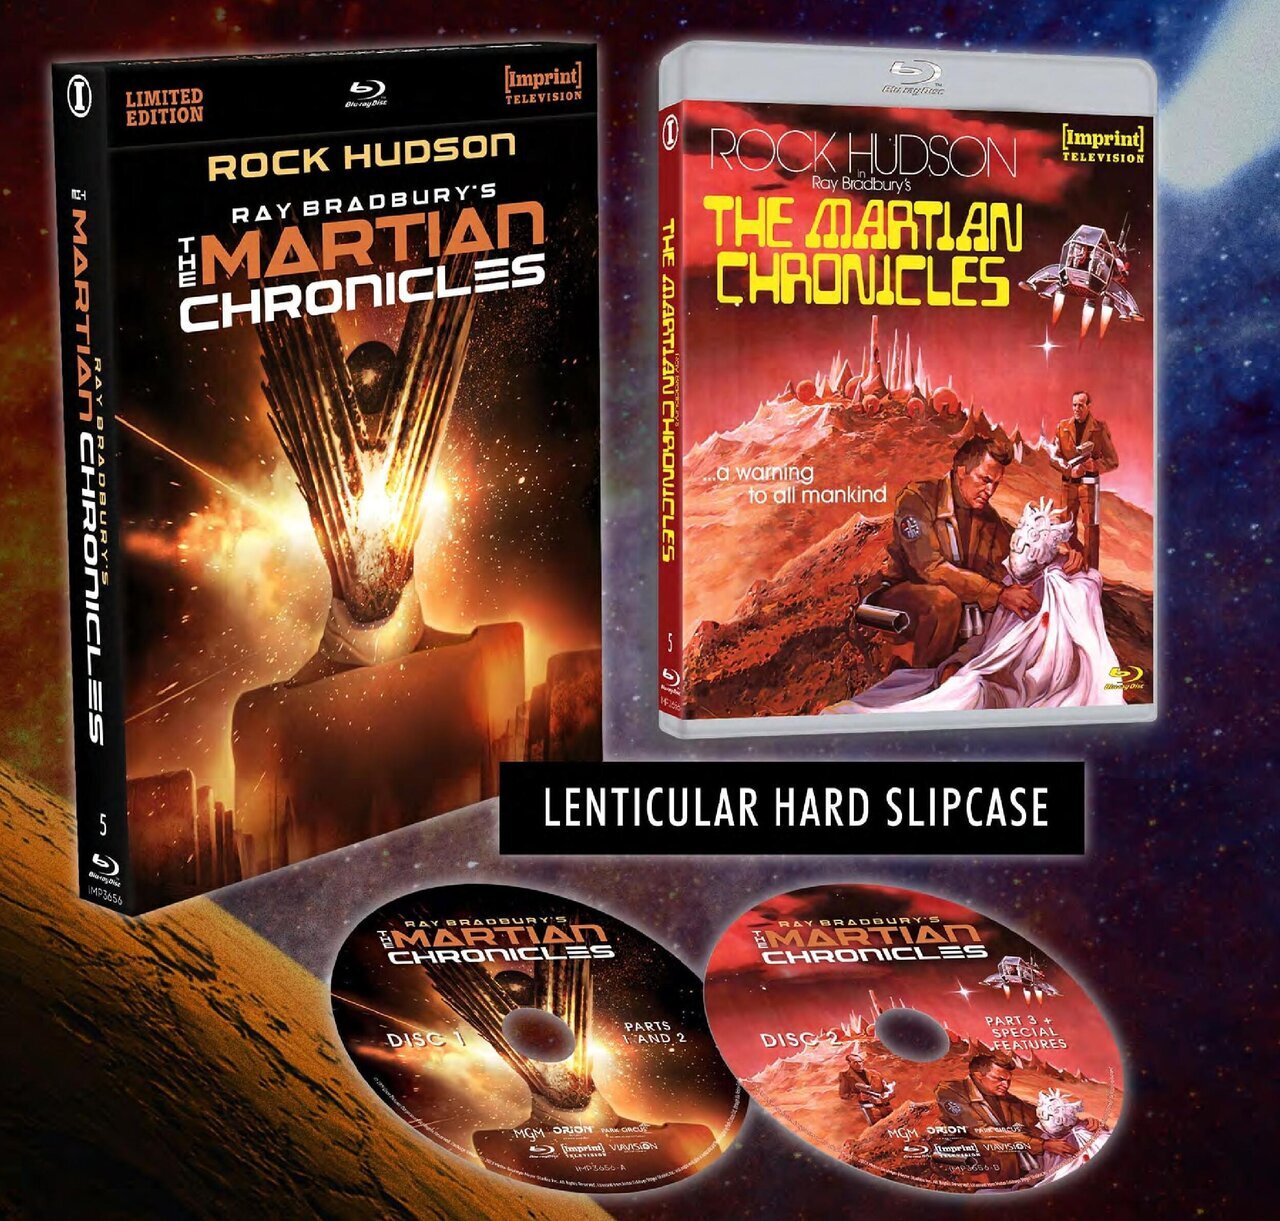 THE MARTIAN CHRONICLES (REGION FREE IMPORT - LIMITED EDITION) BLU-RAY